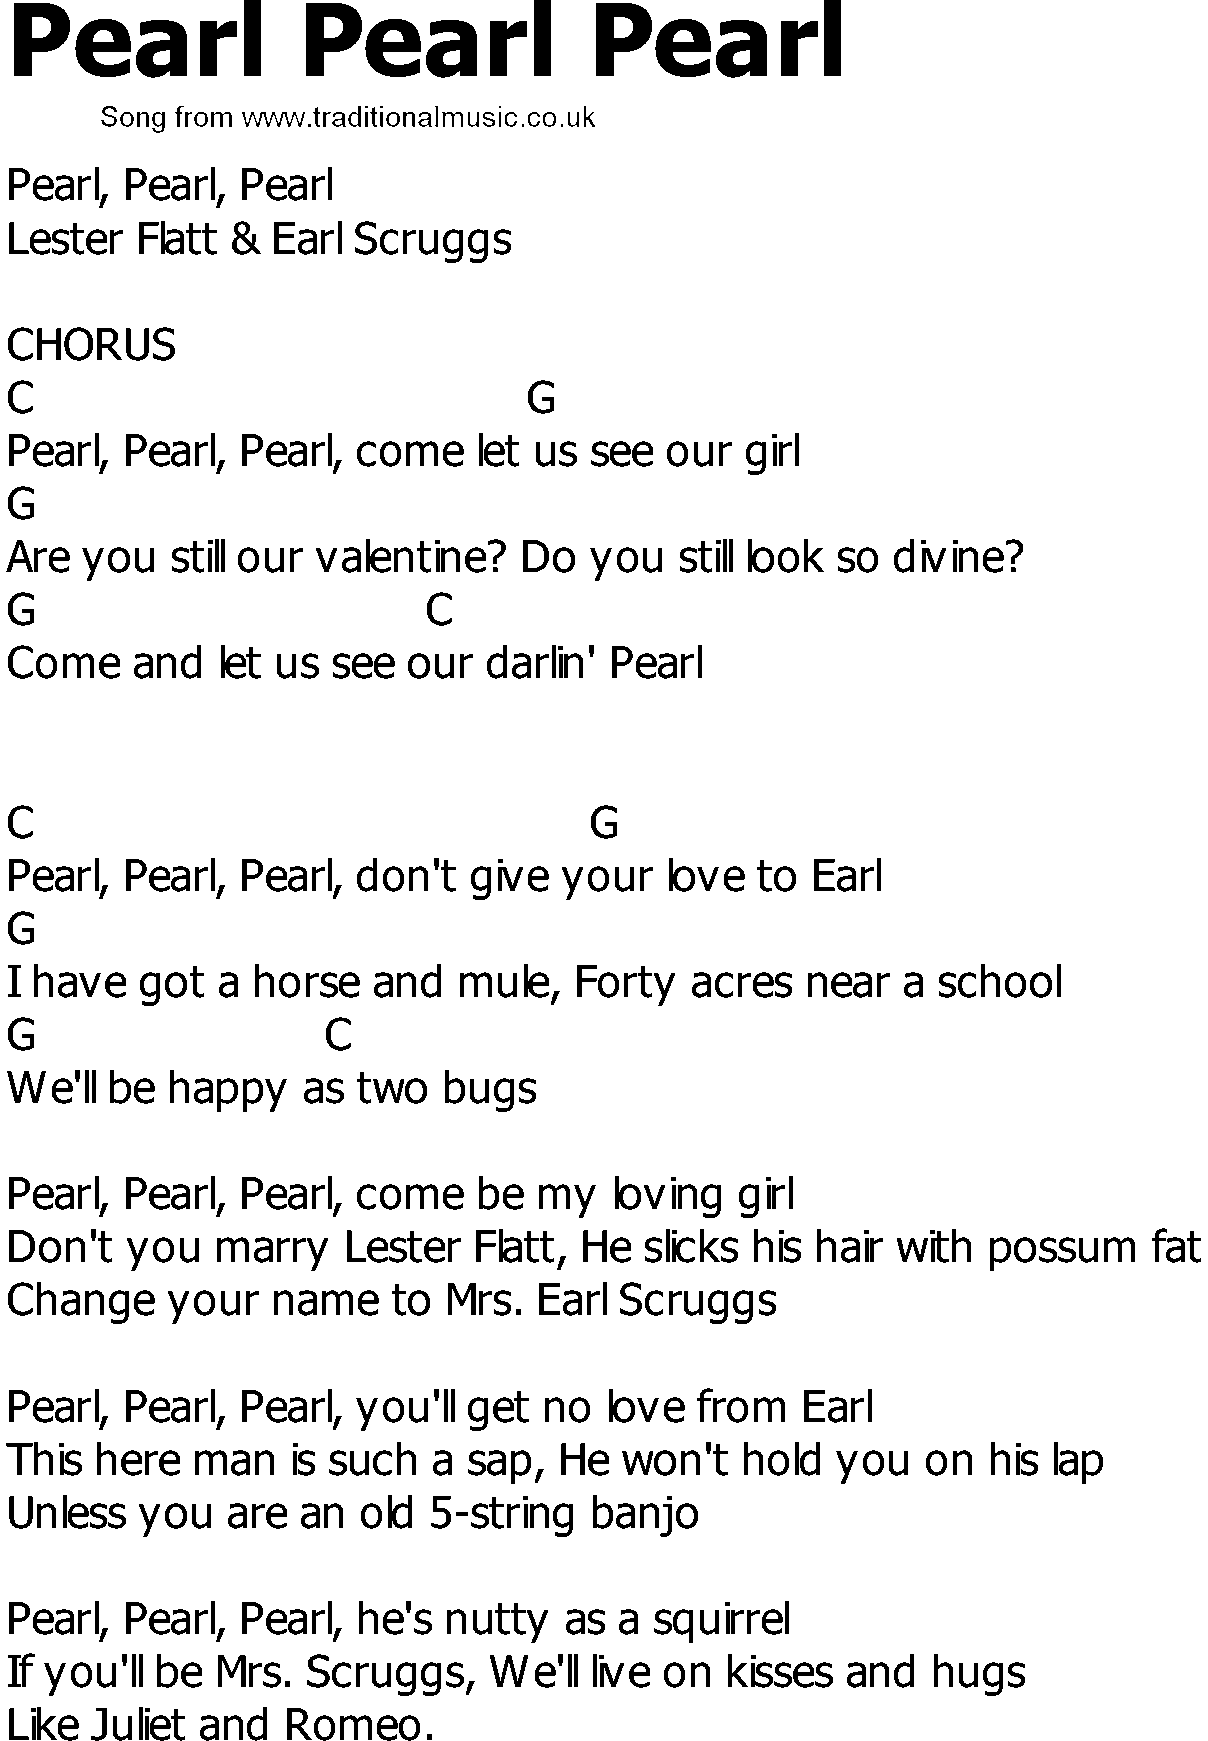 Old Country song lyrics with chords - Pearl Pearl Pearl